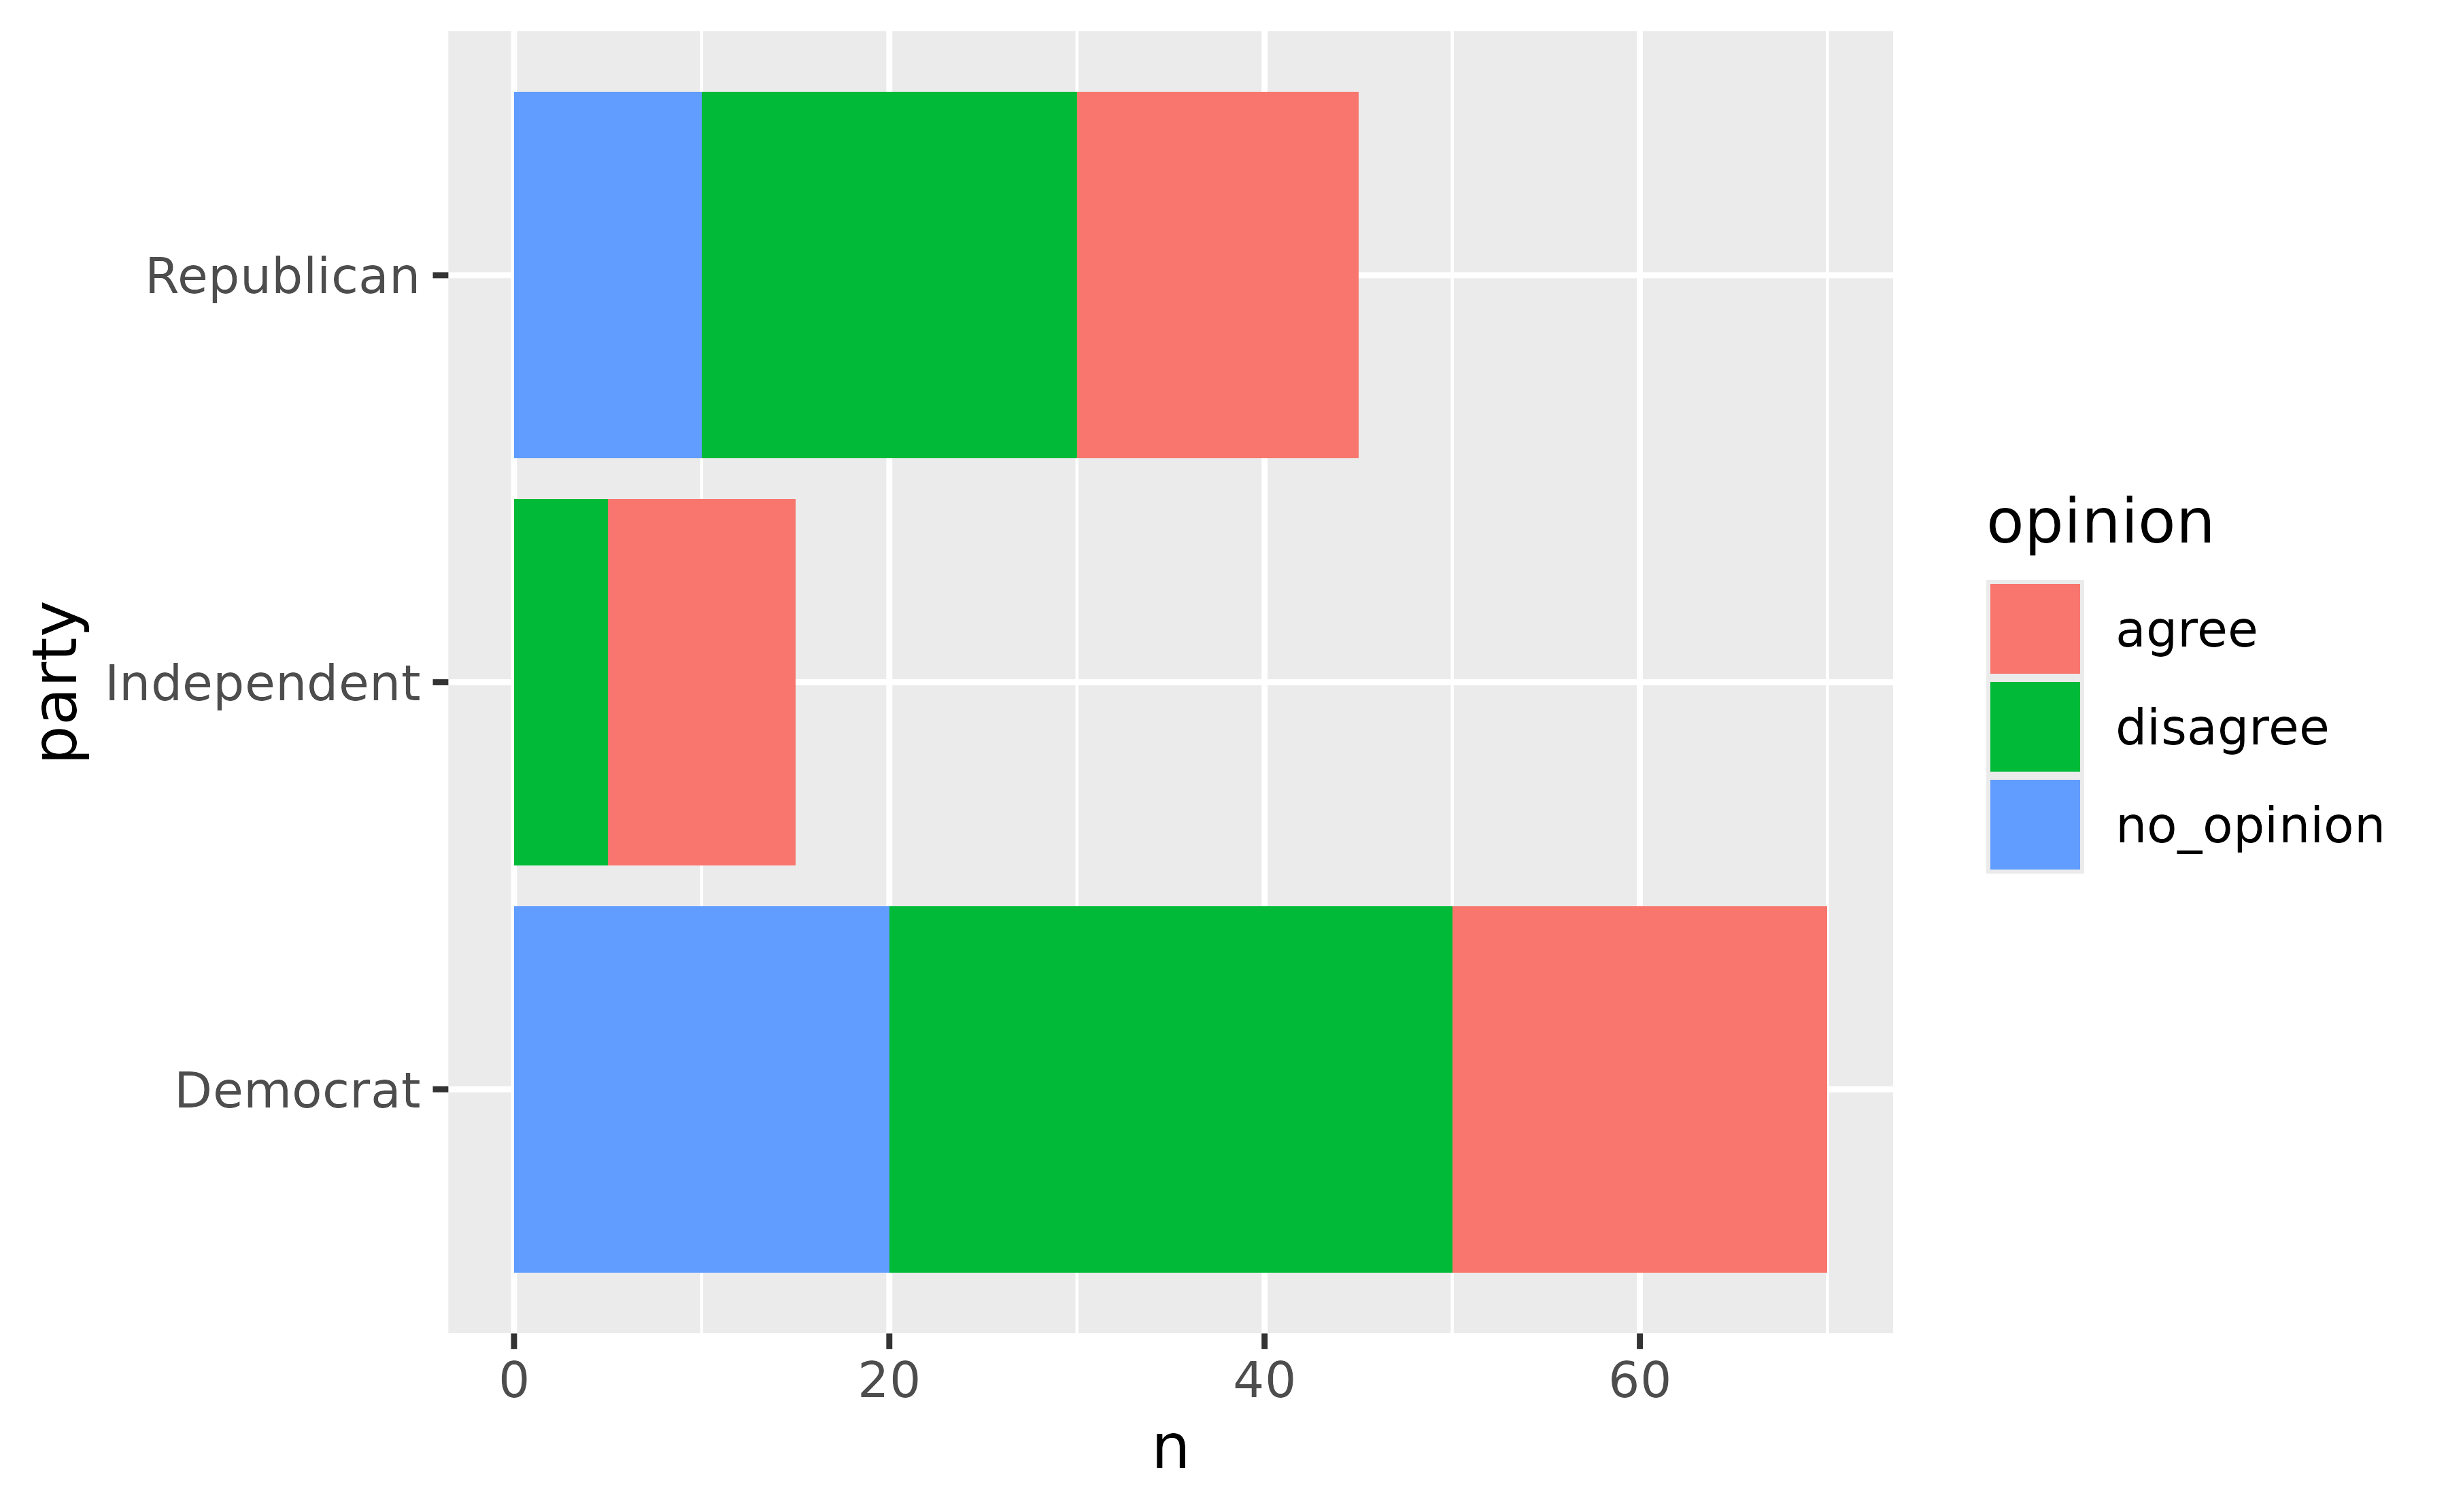 A horizontal stacked bar chart showing opinion counts for 3 parties, stacked and filled by 3 types of opinions.